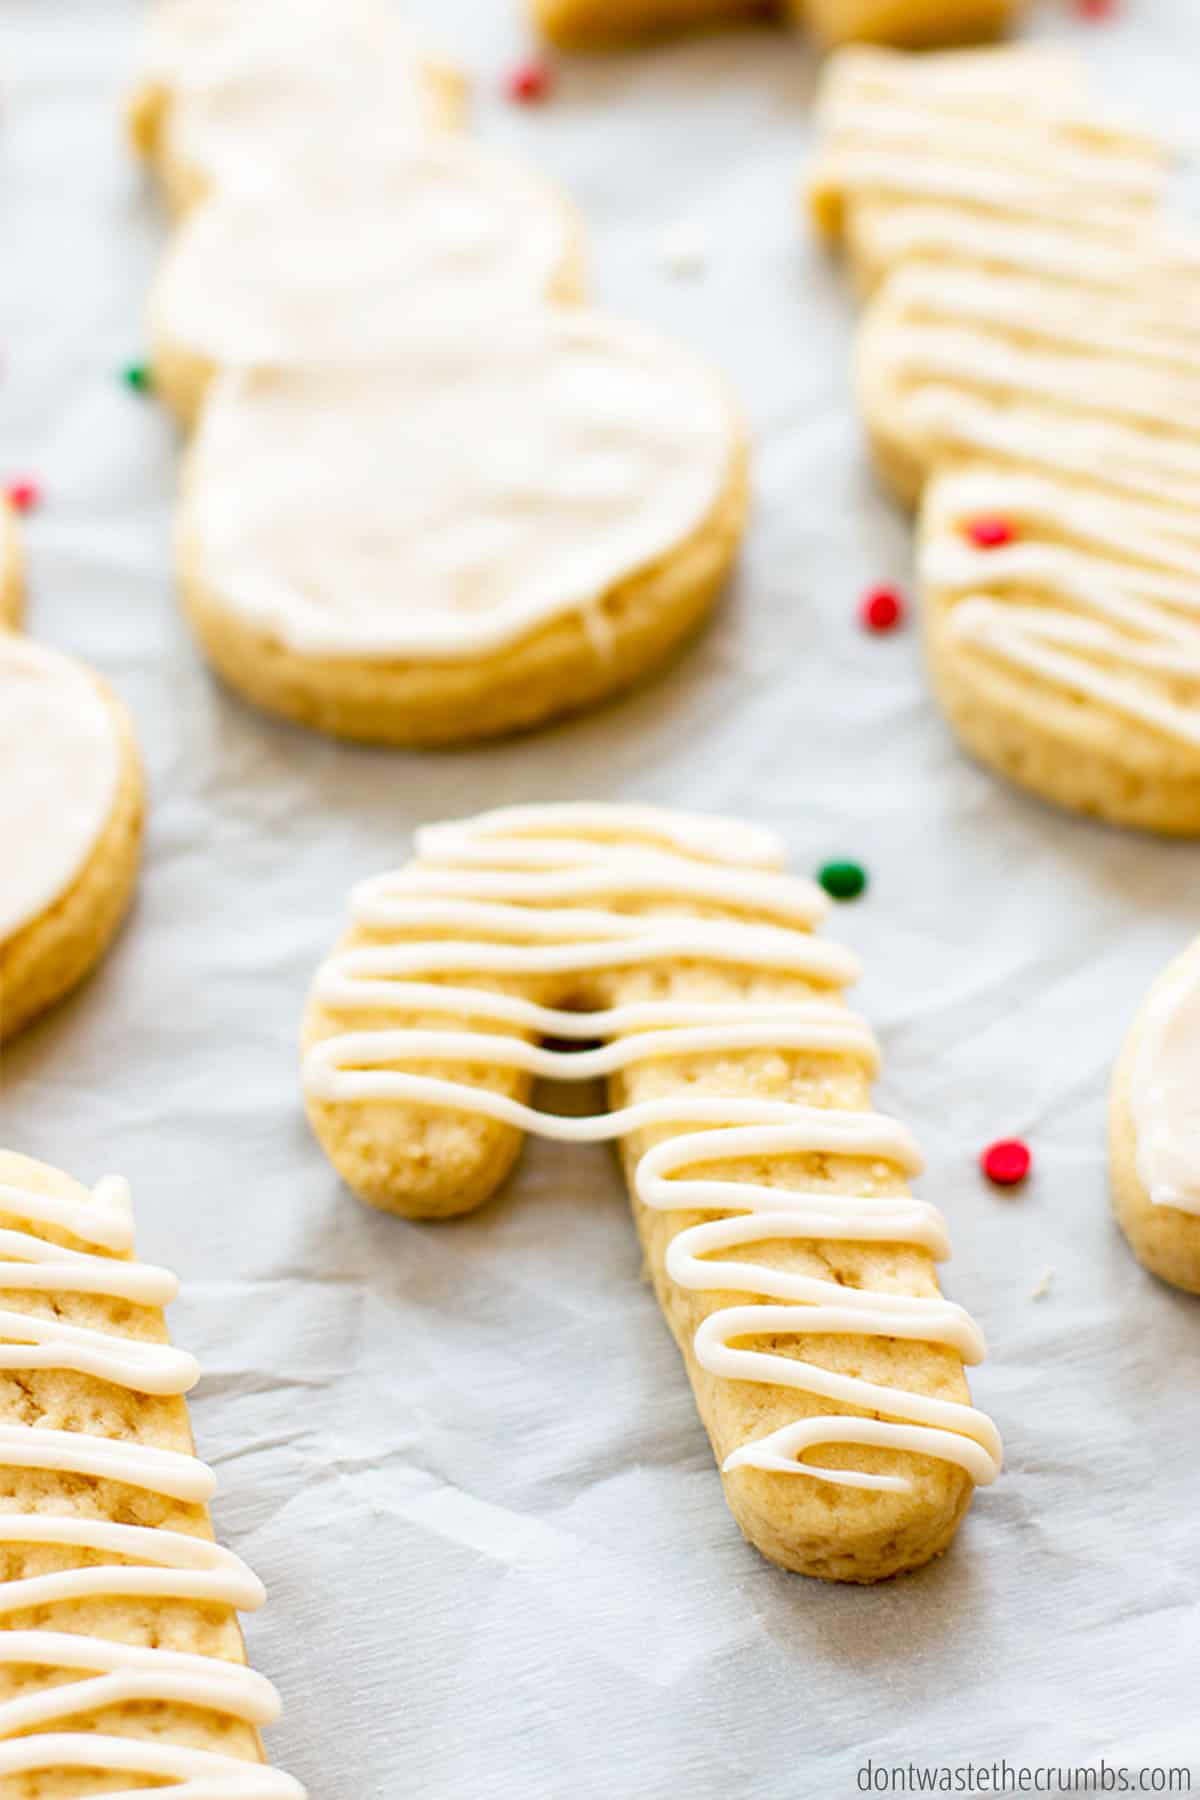 A cookie in the shape of a cane is featured with a zigzag of white icing. In the background are other freshly iced cookies in the shapes of snowmen.